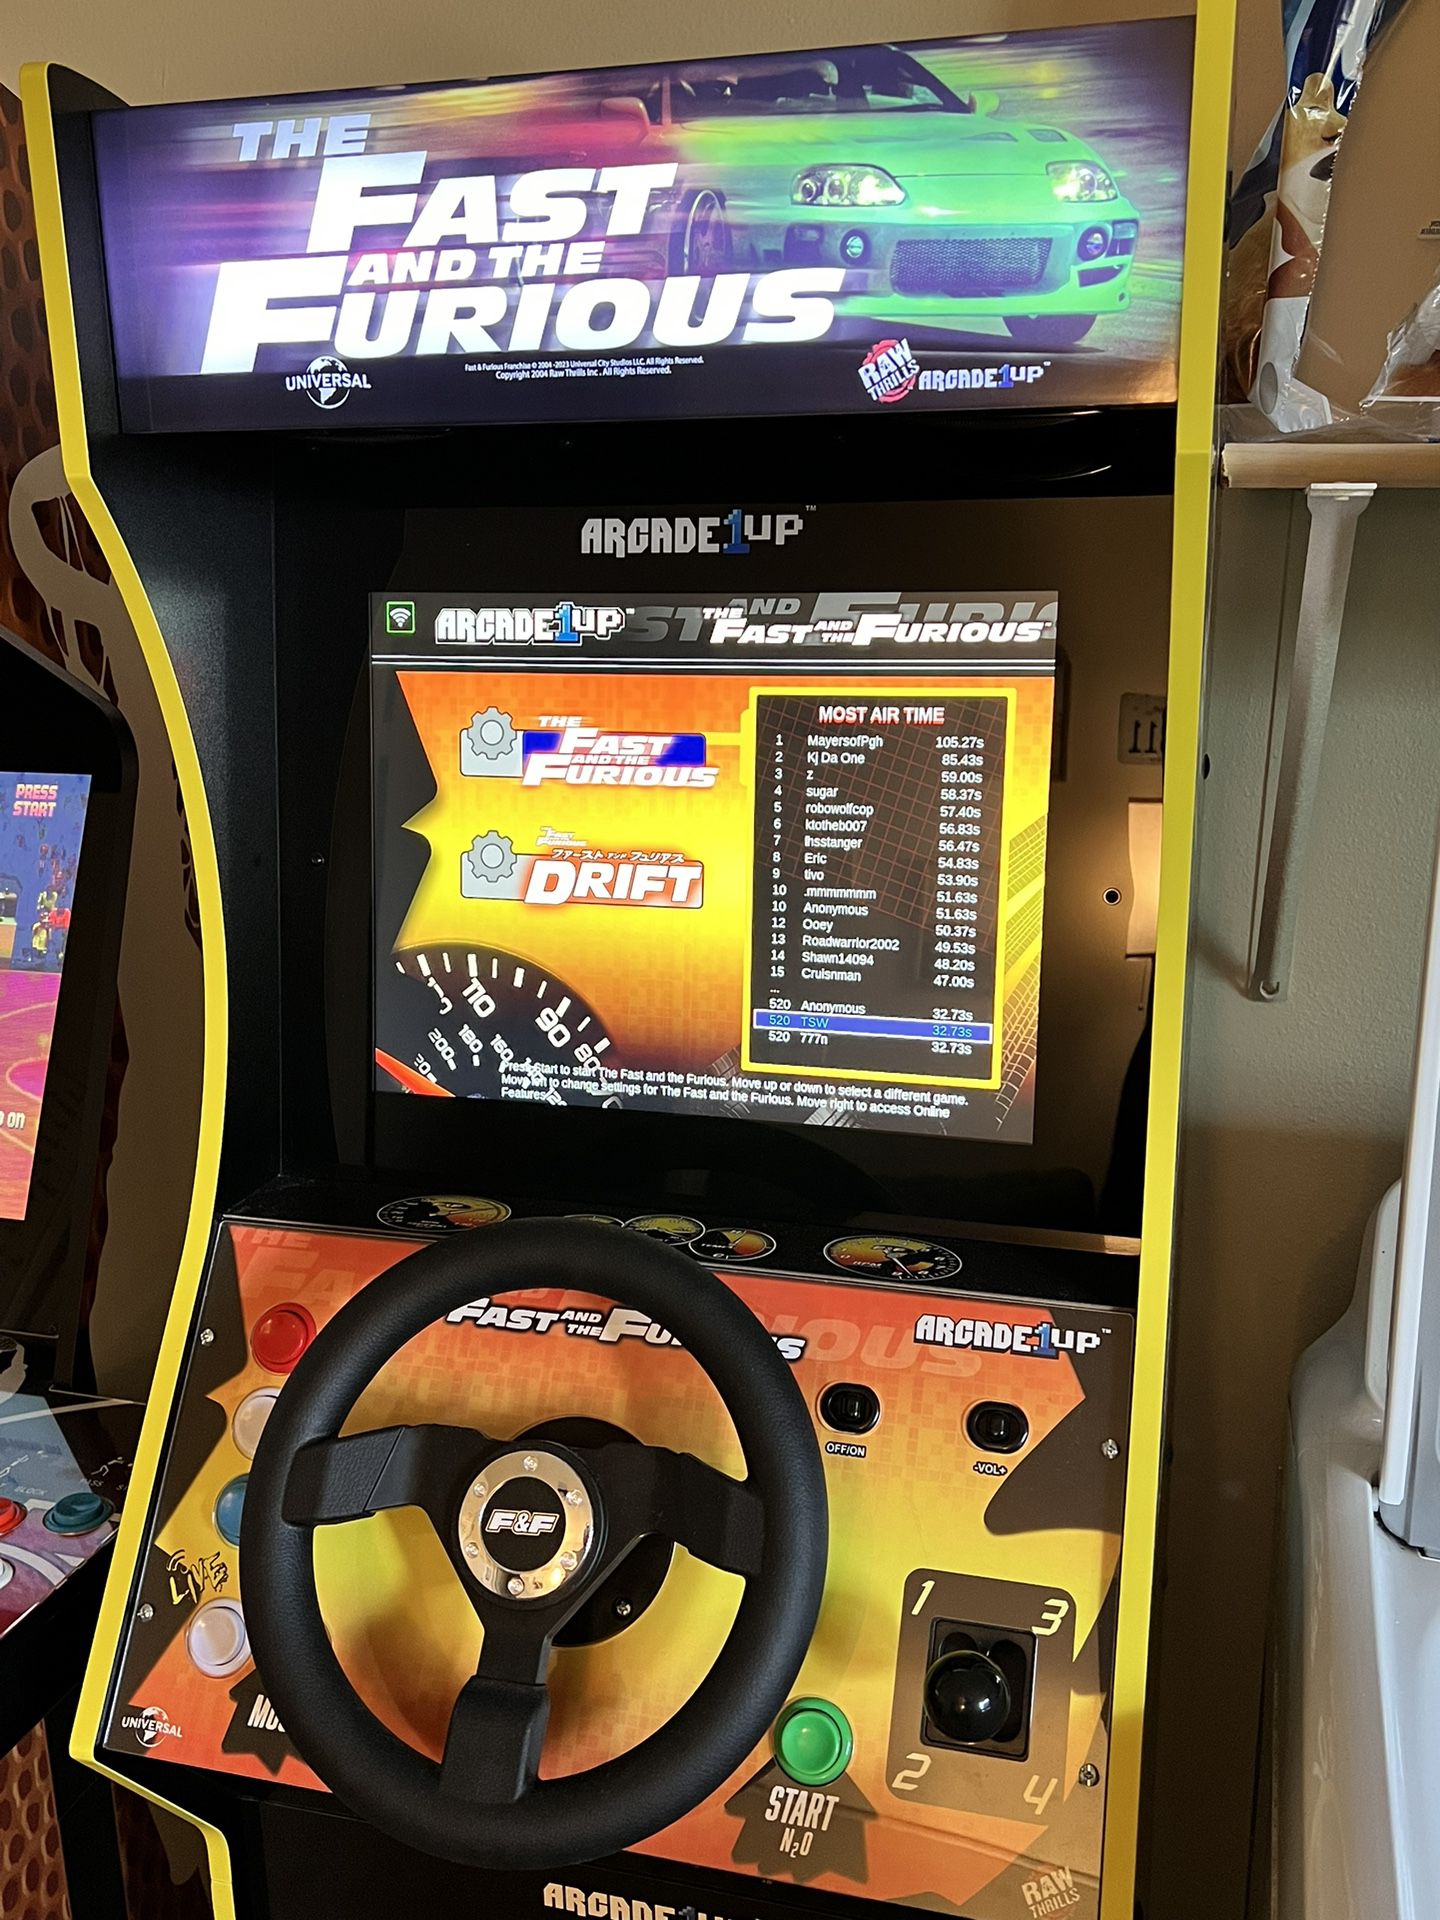 The Fast and the Furious Arcade Game 